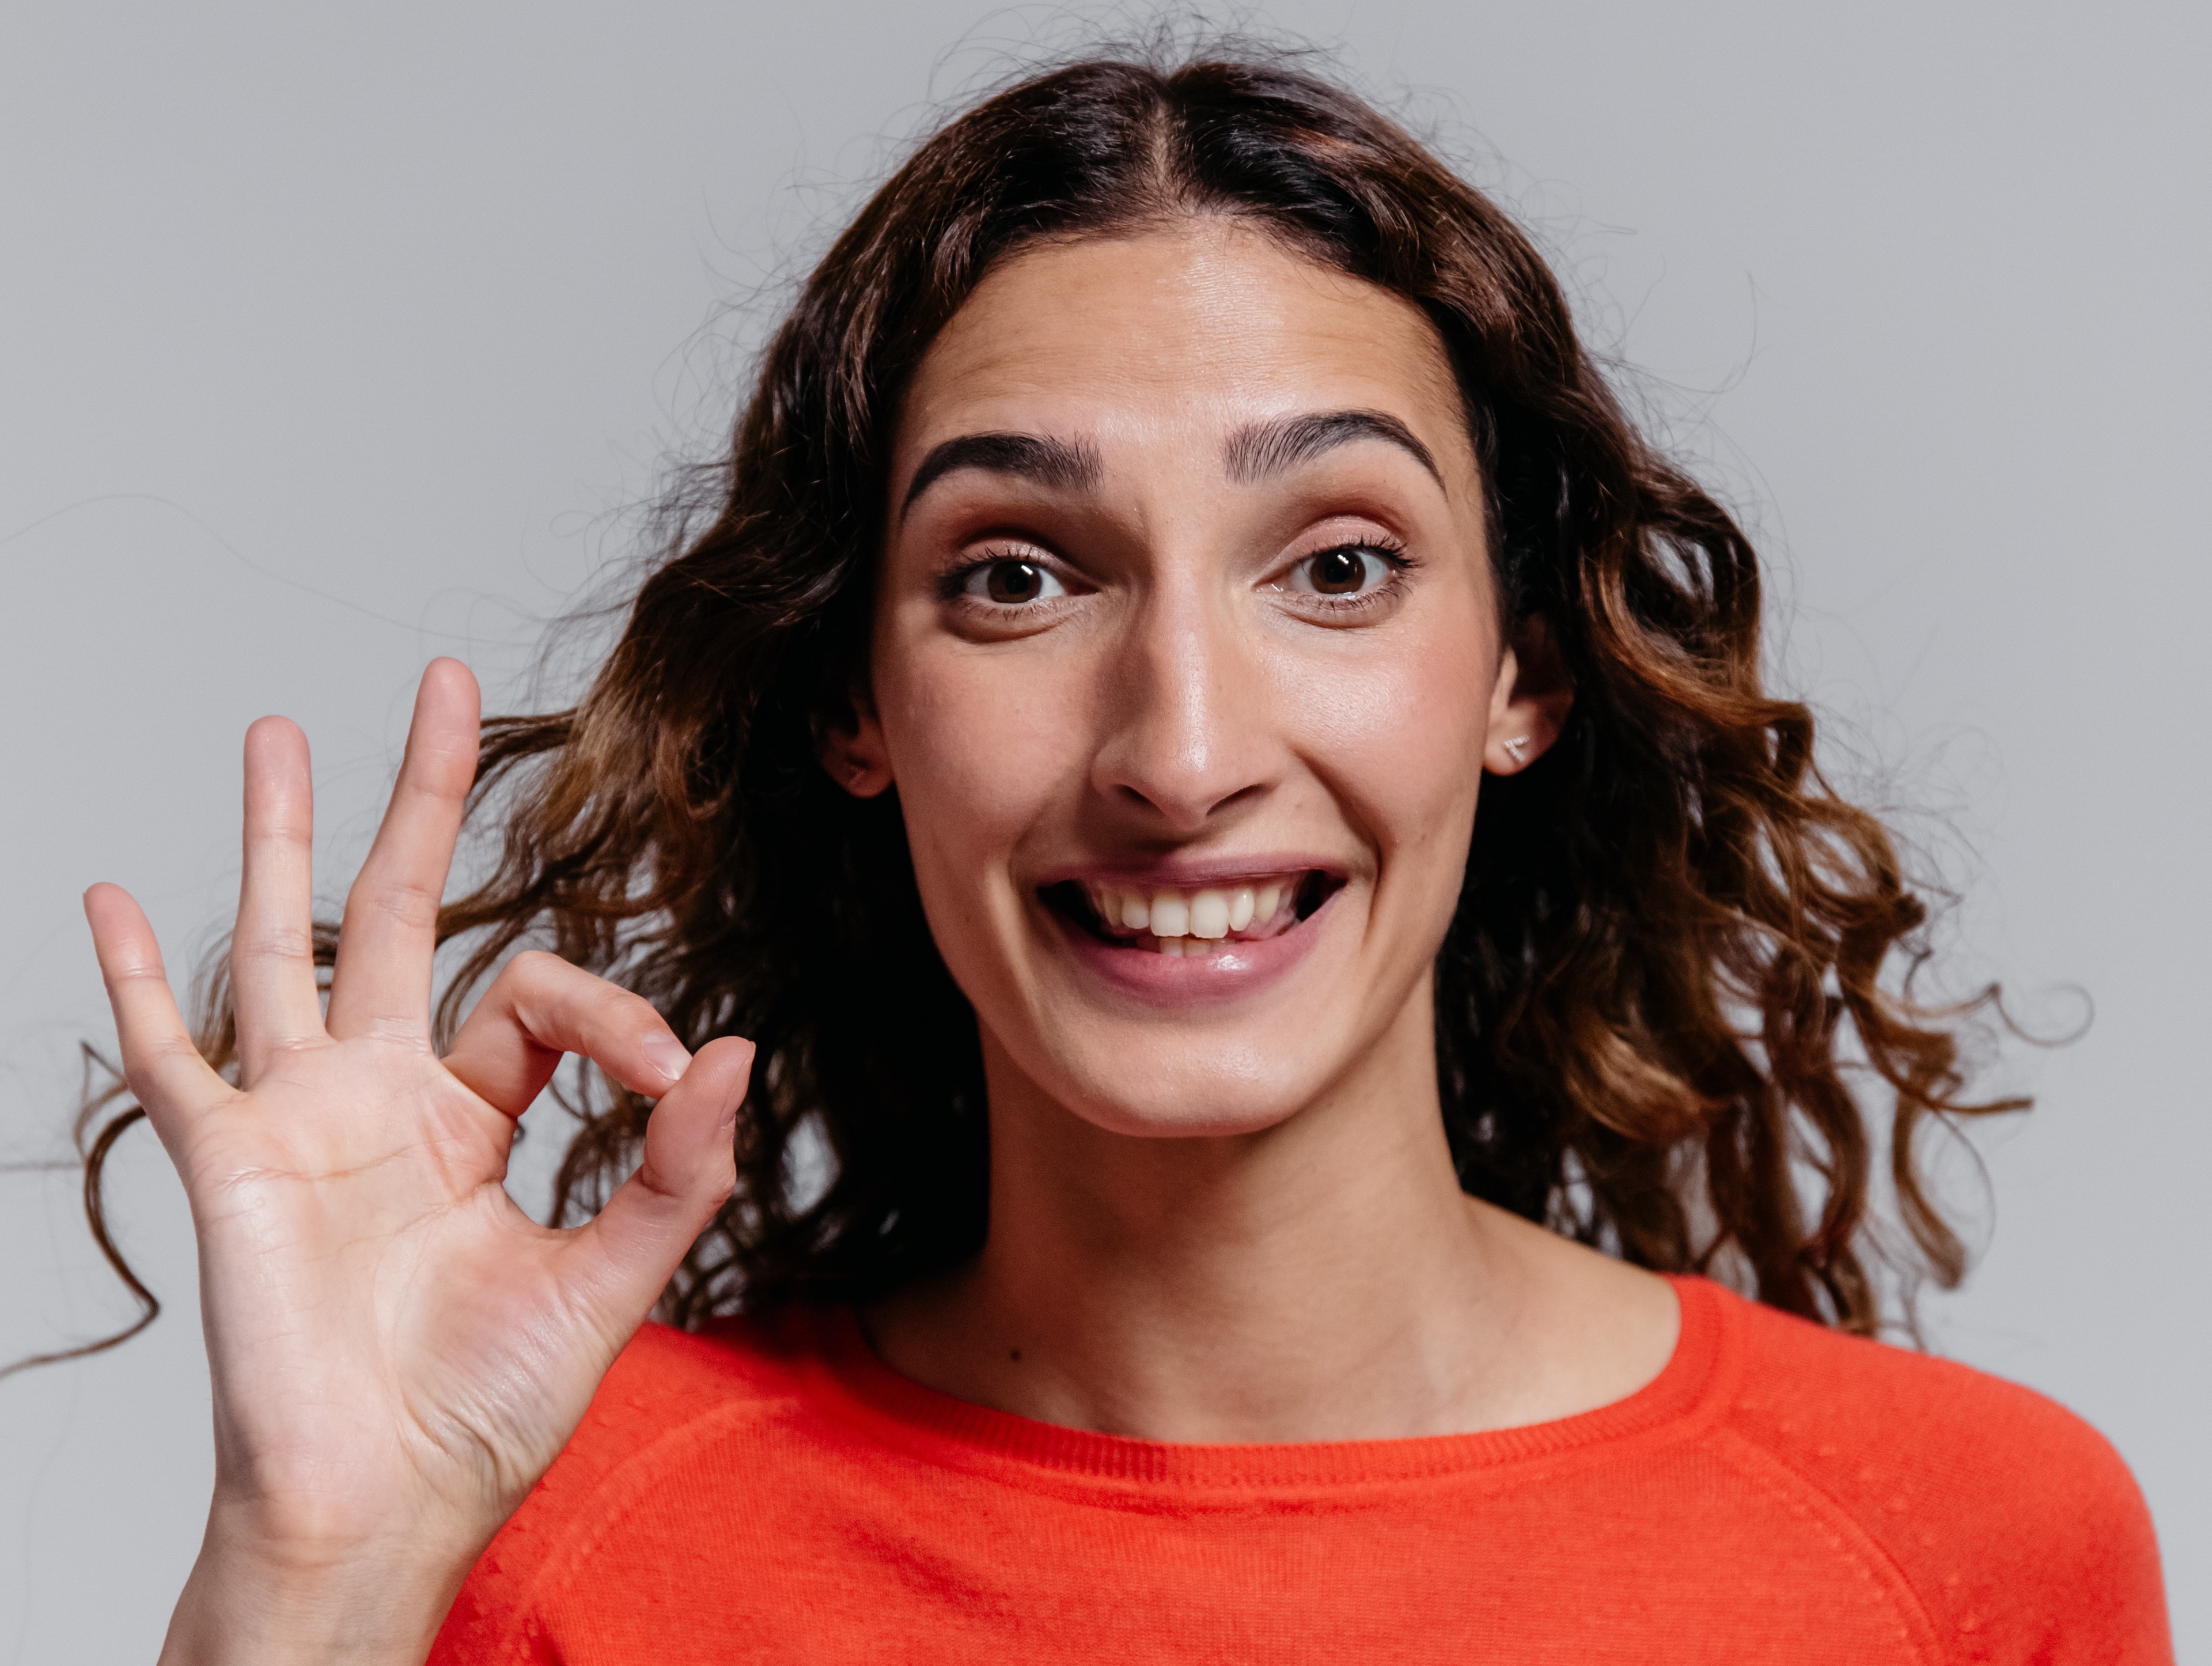 woman showing OK sign with her fingers